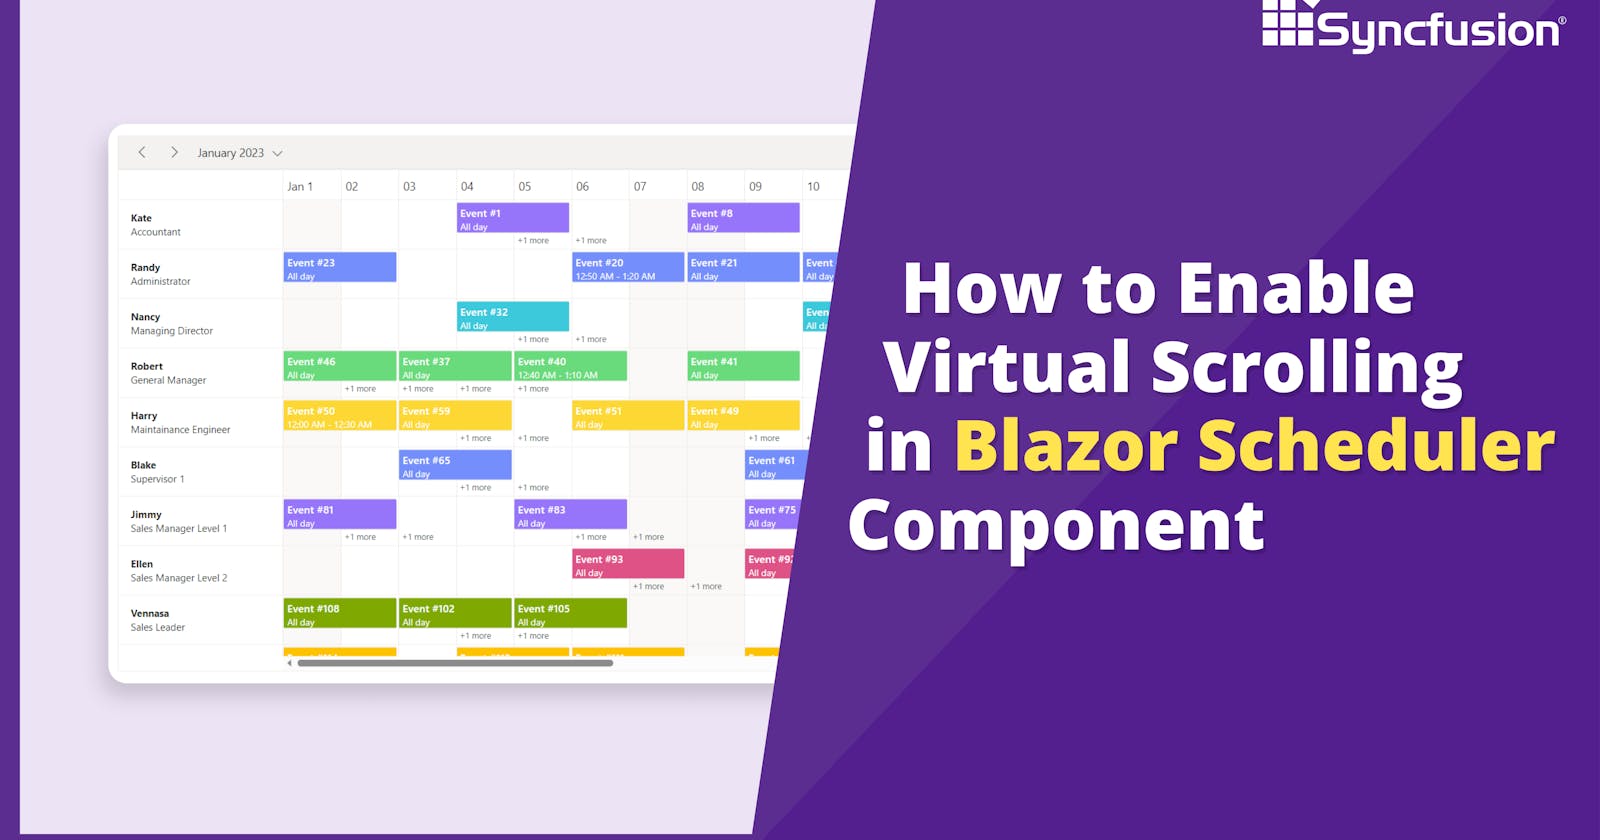 How to Enable Virtual Scrolling in Blazor Scheduler Component